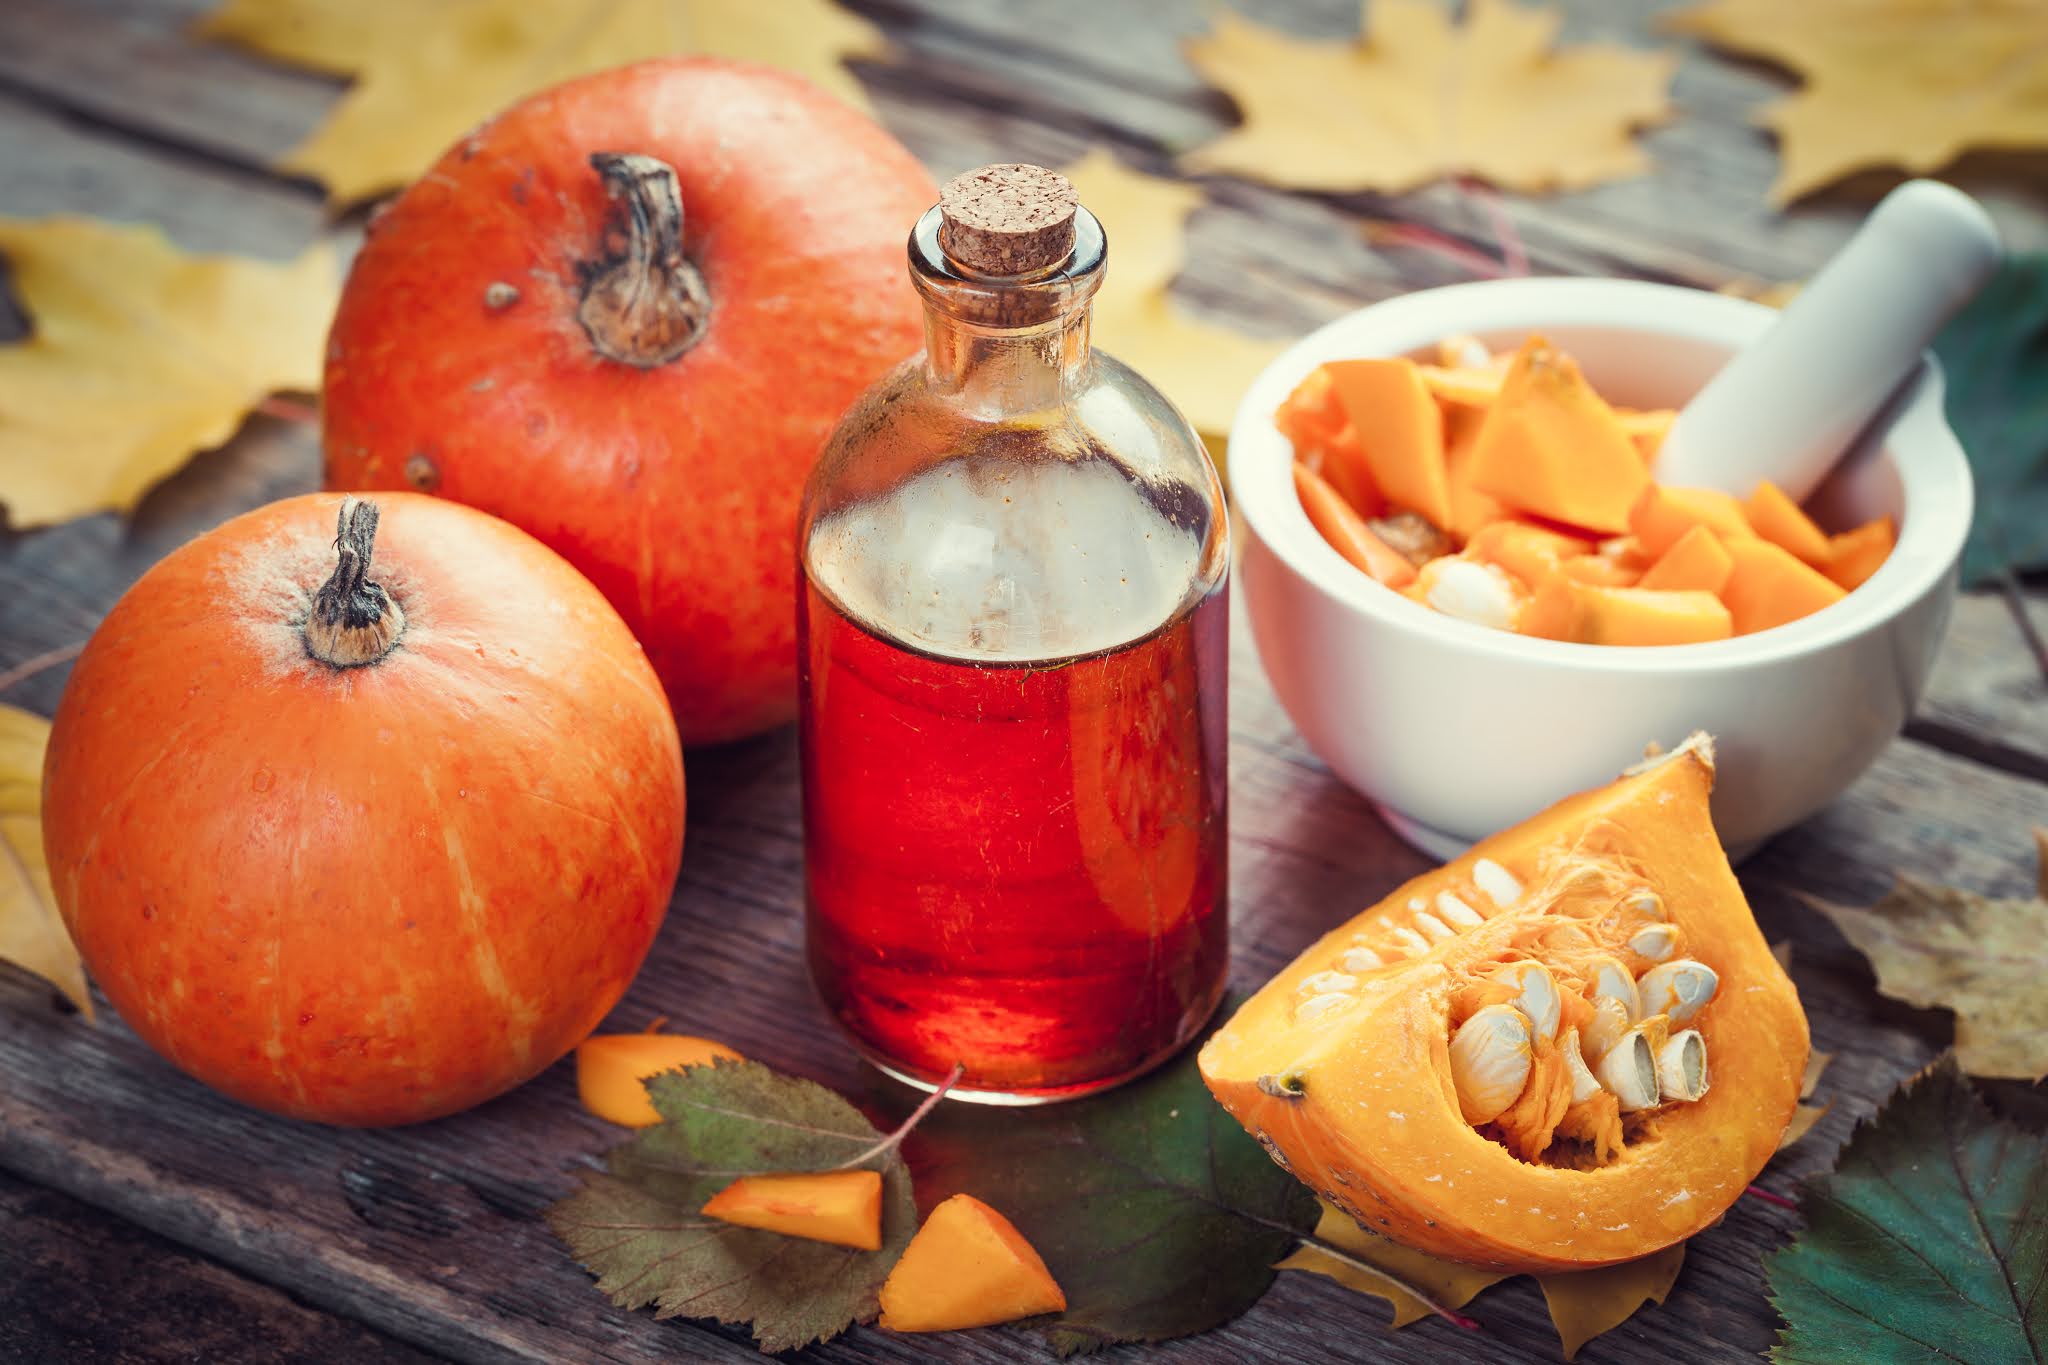 How to Make Your Home Smell Like Autumn